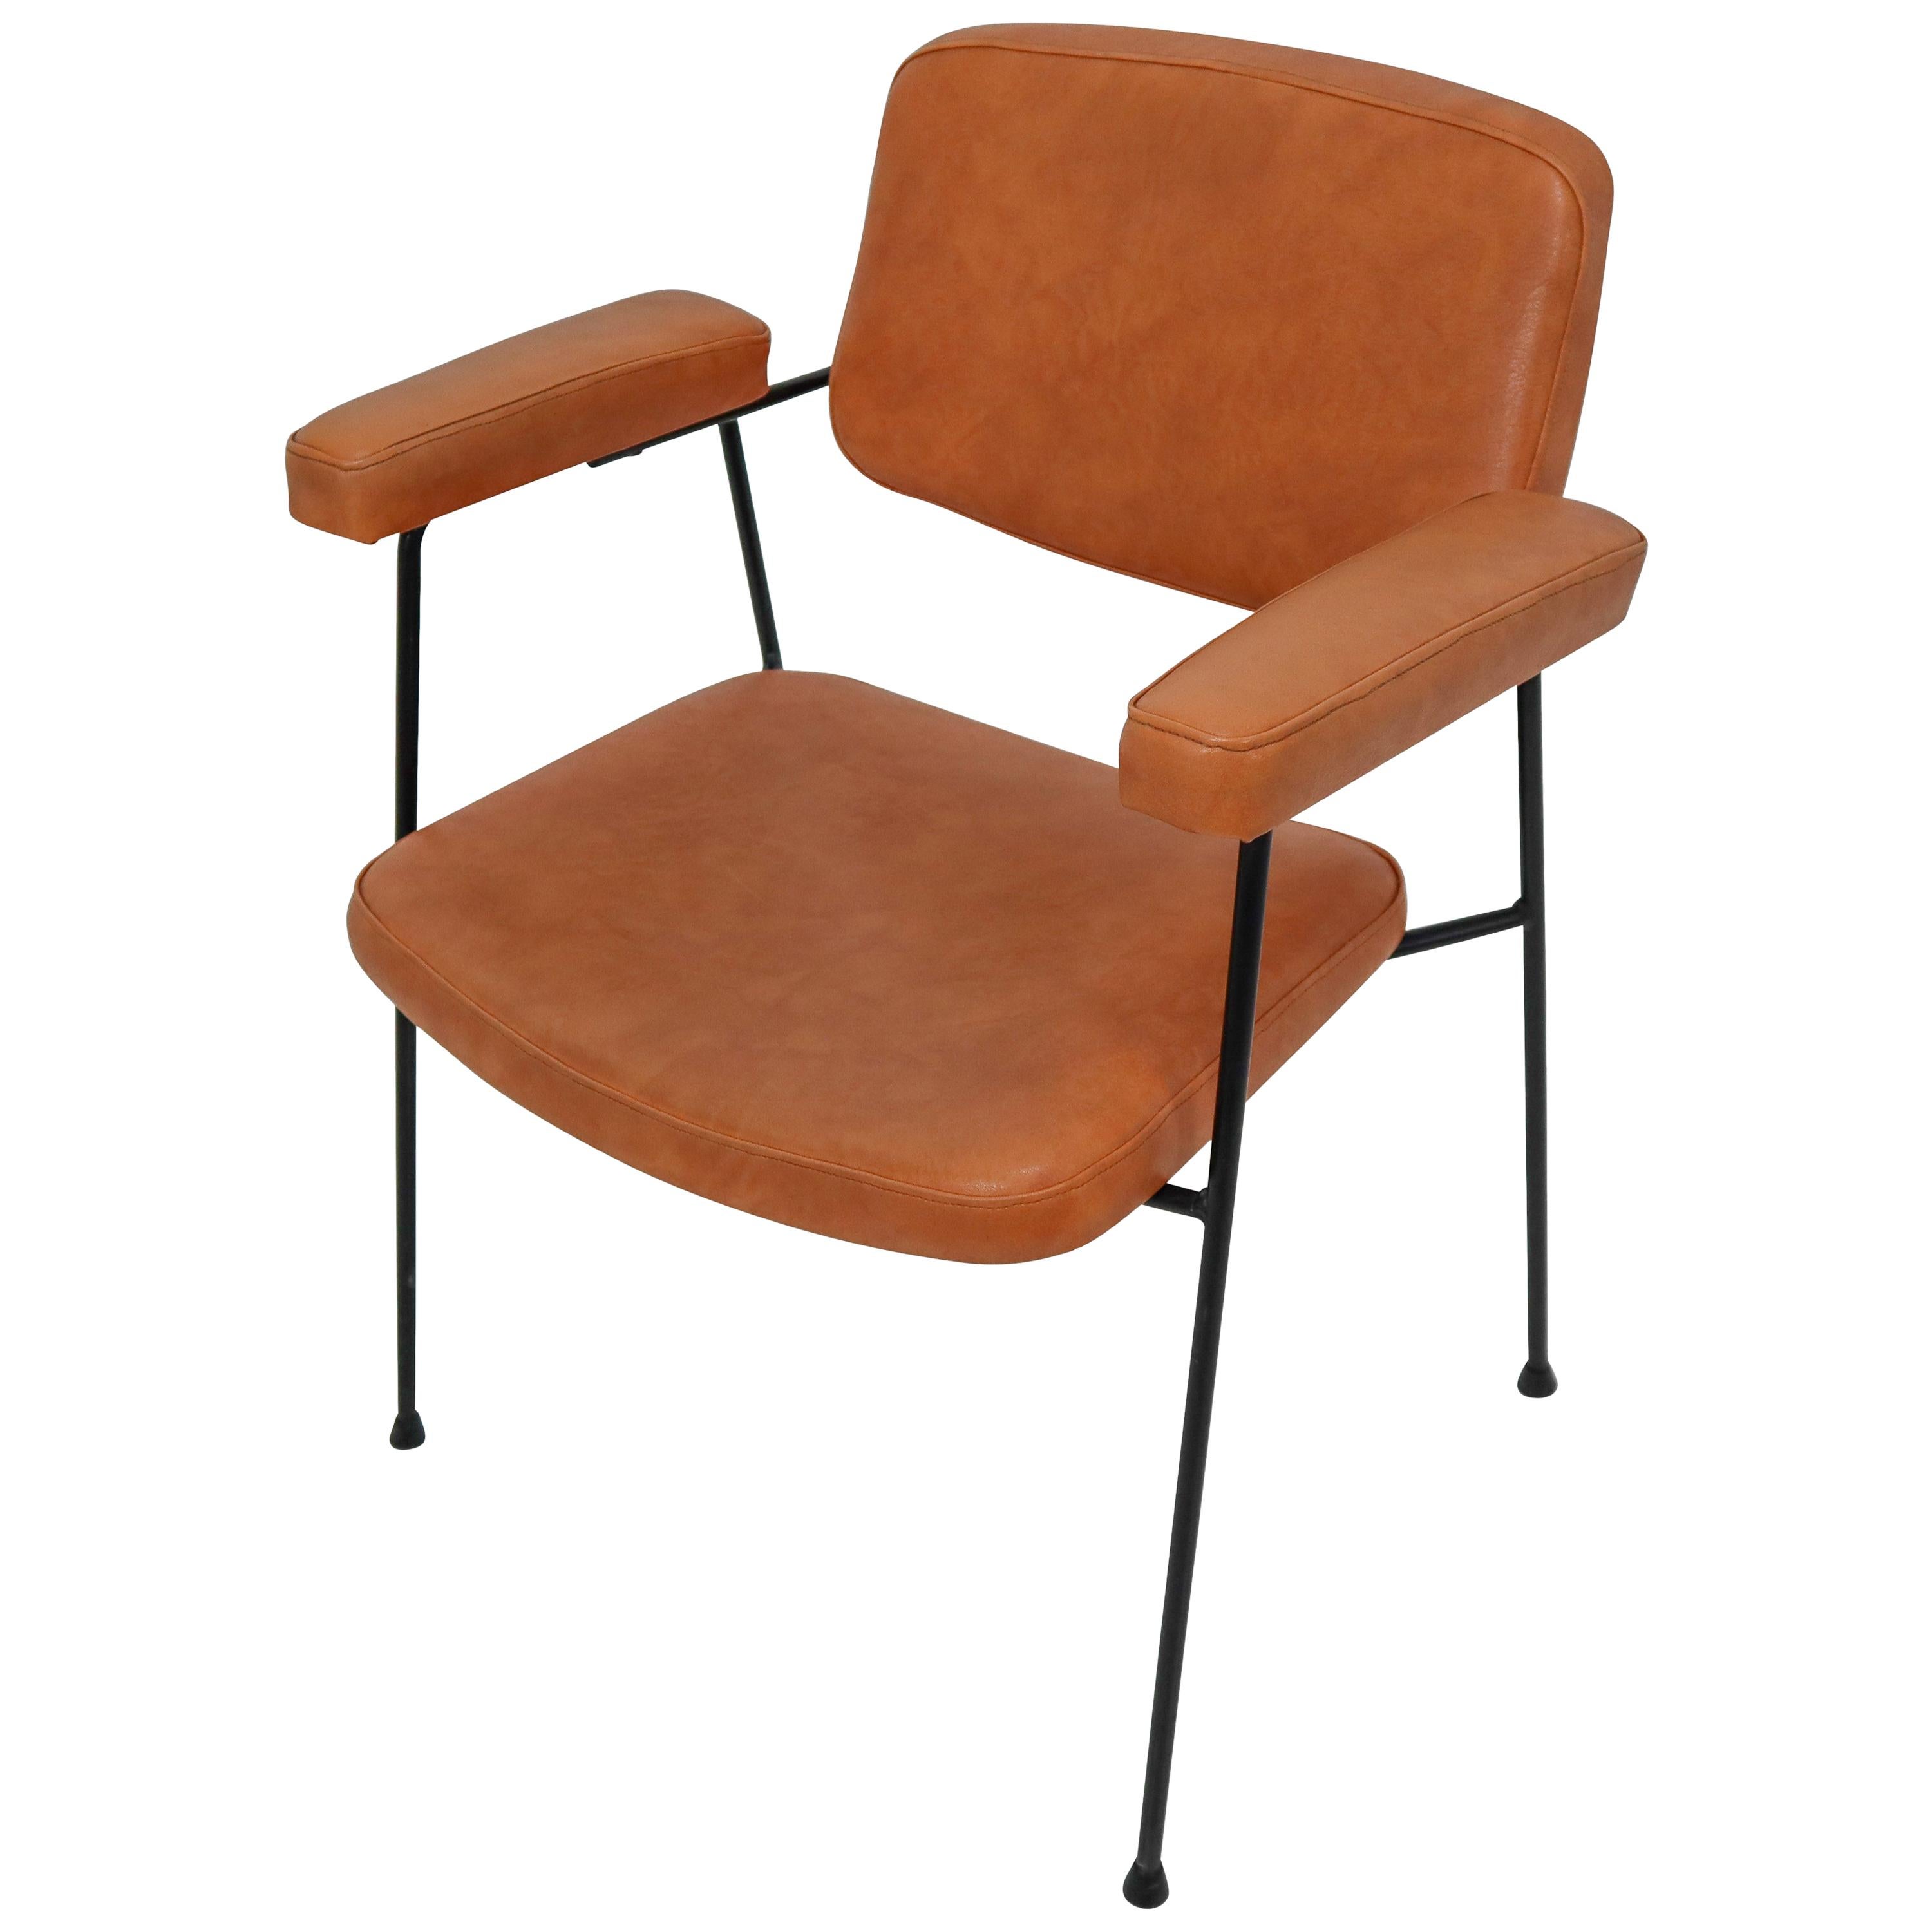 Midcentury Chair "CM197" by Pierre Paulin for Thonet, France, 1950s